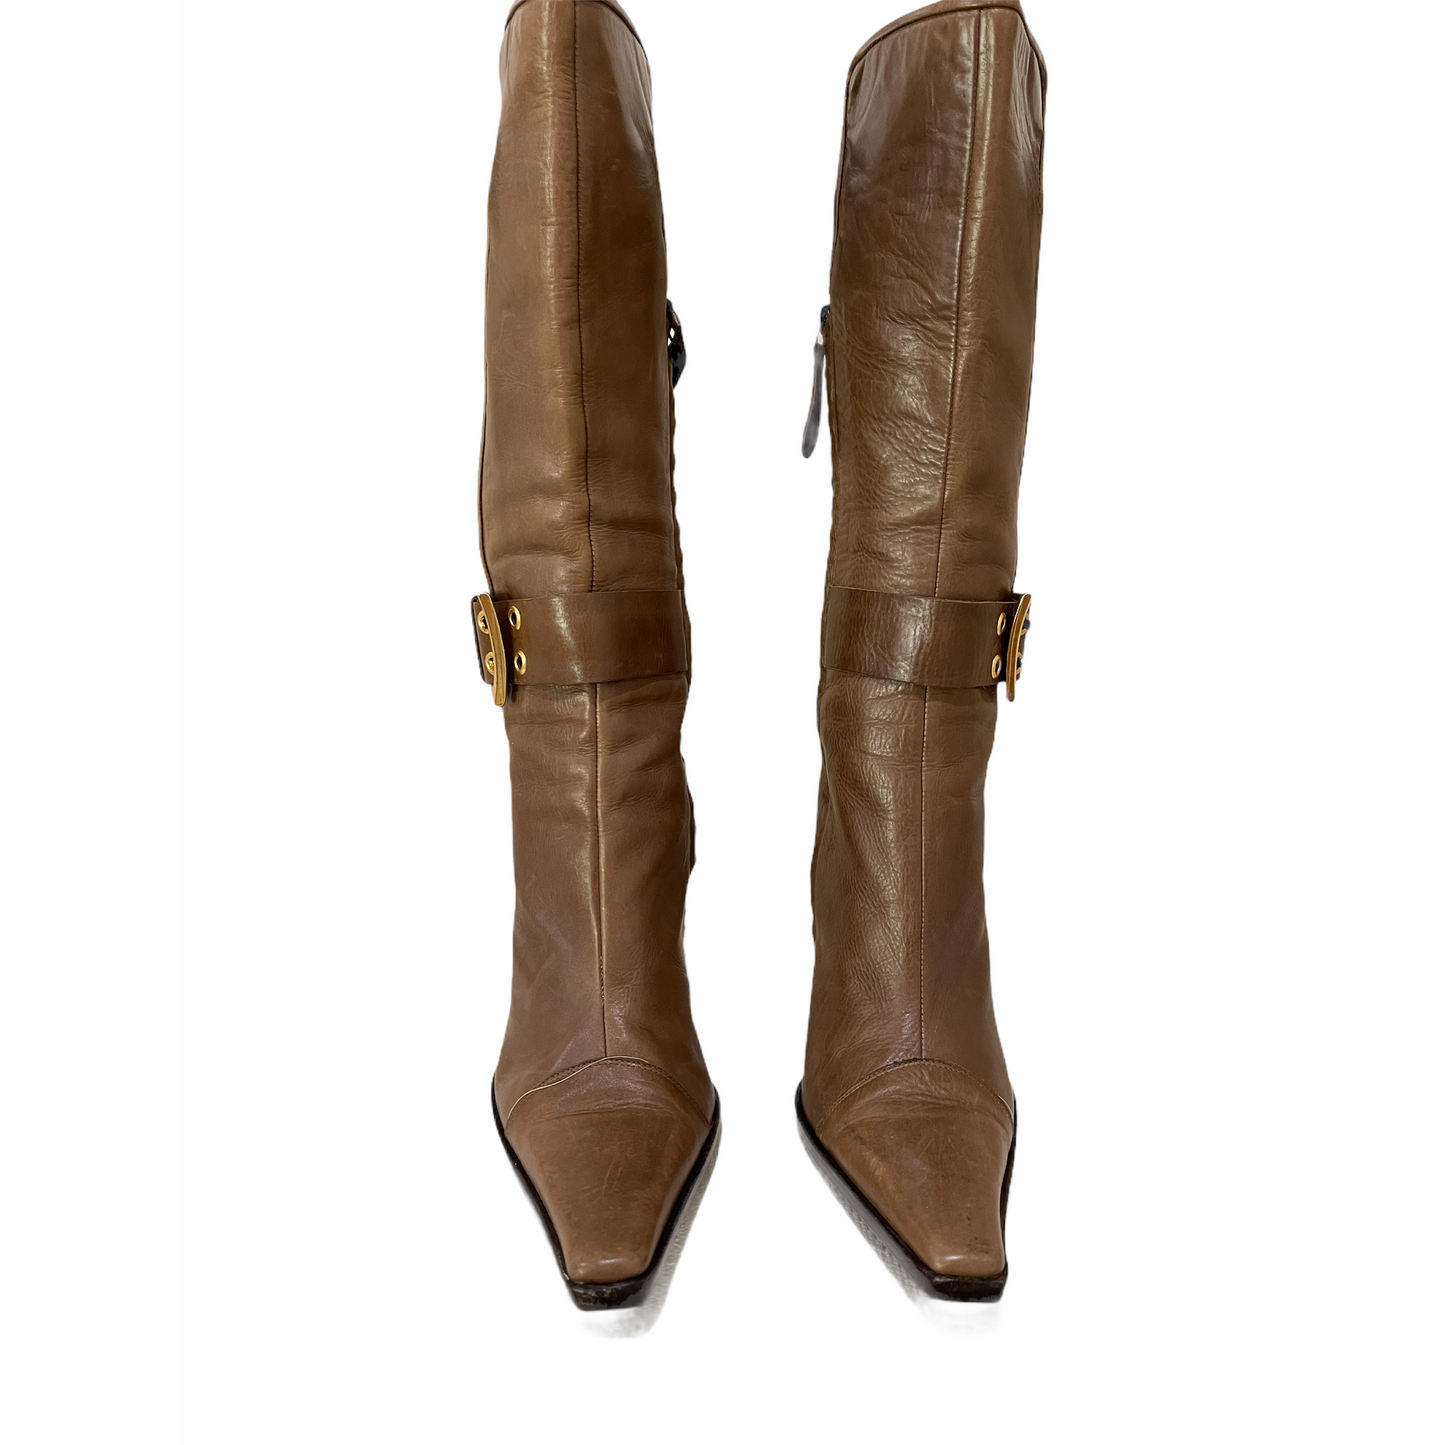 Heeled Boots-Brown Leather-By Vicini